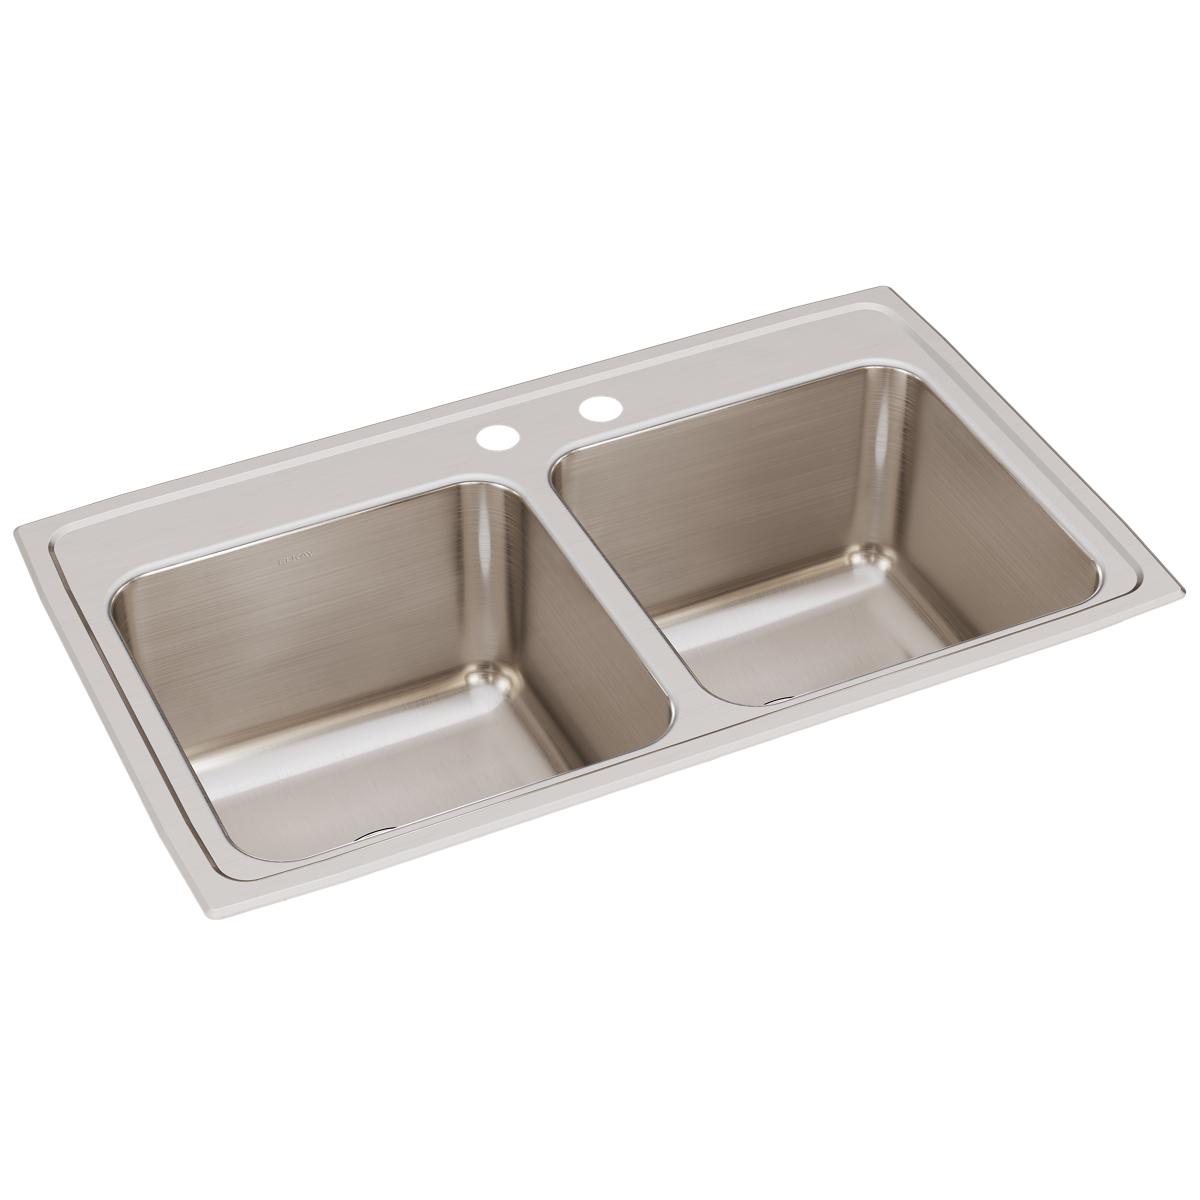 Elkay Lustertone Classic 33" x 19-1/2" x 10-1/8" MR2-Hole Equal Double Bowl Drop-in Sink